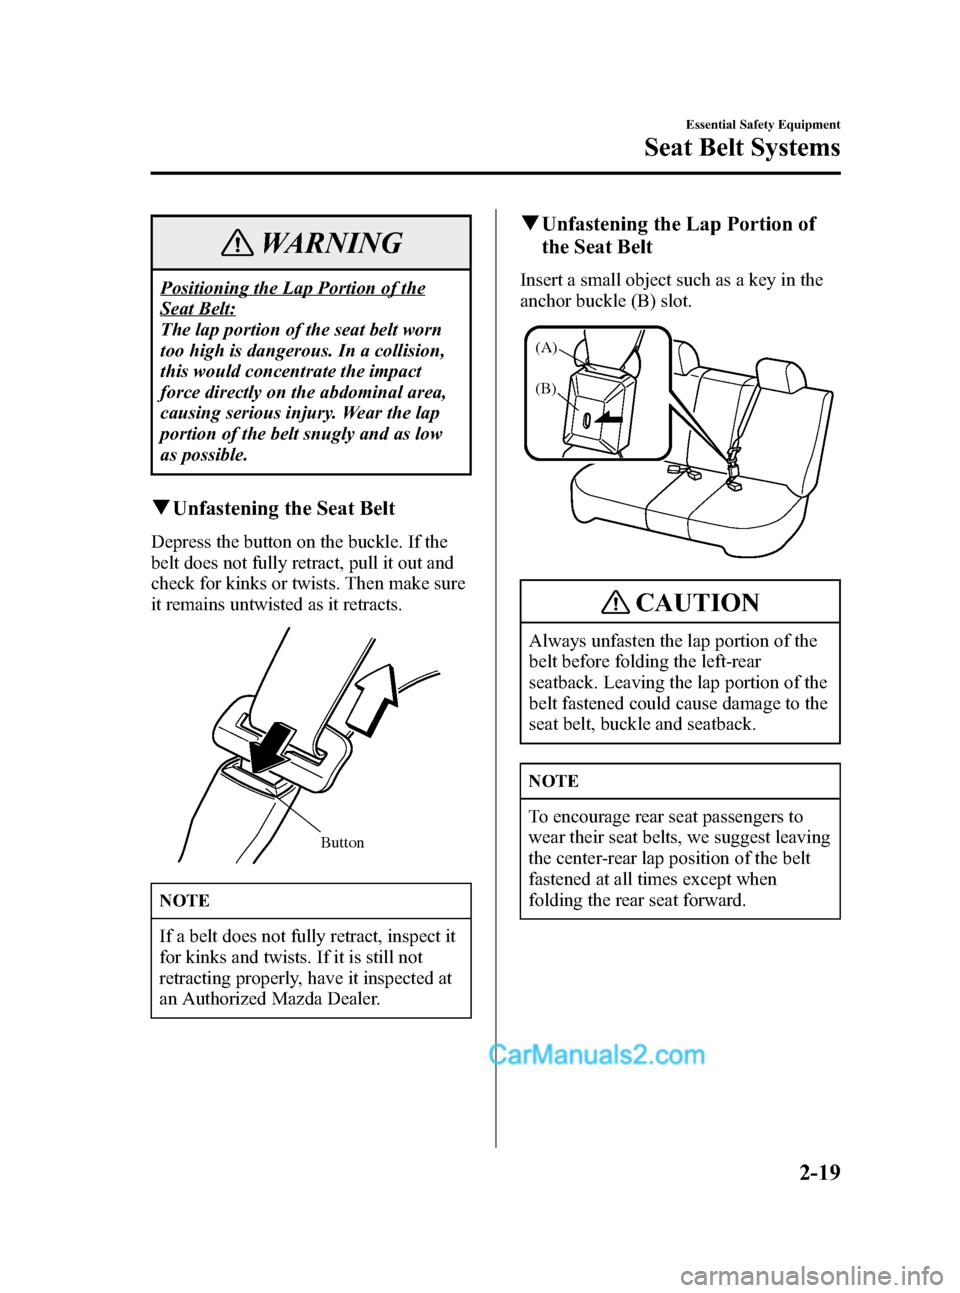 MAZDA MODEL MAZDASPEED 3 2007  Owners Manual (in English) Black plate (33,1)
WARNING
Positioning the Lap Portion of the
Seat Belt:
The lap portion of the seat belt worn
too high is dangerous. In a collision,
this would concentrate the impact
force directly o